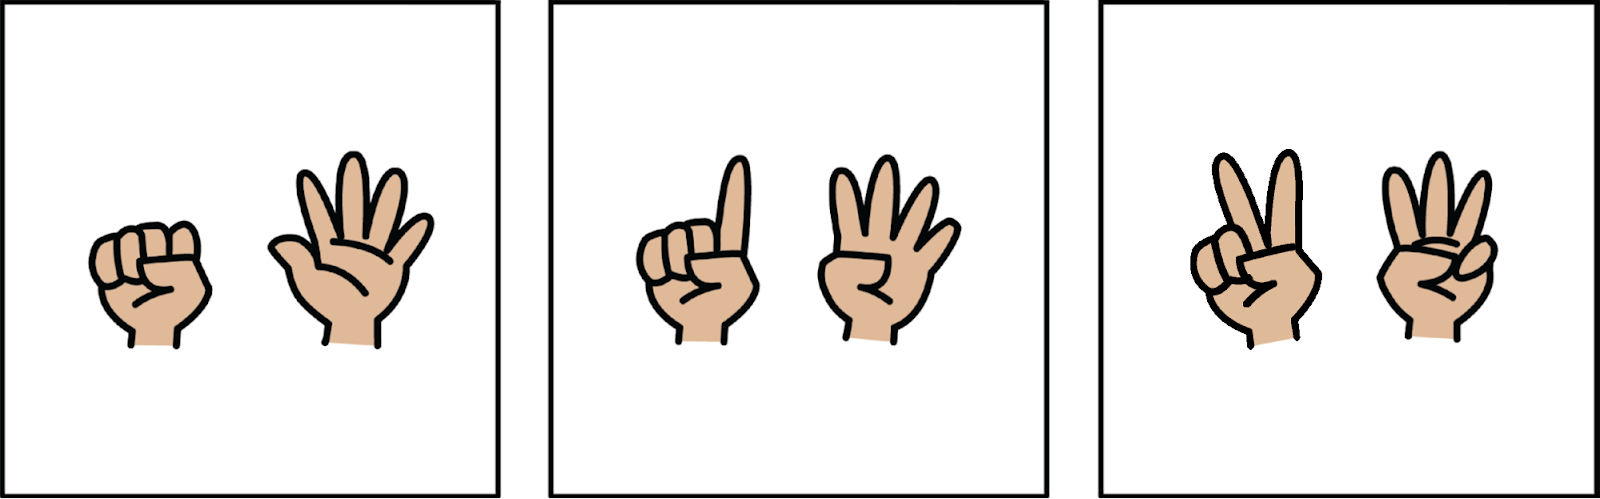 First, 1 hand showing no fingers + 1 hand showing 5 fingers. Next, 1 hand showing 1 finger + 1 hand showing 4 fingers. Last, 1 hand showing 2 fingers + 1 hand showing 3 fingers.